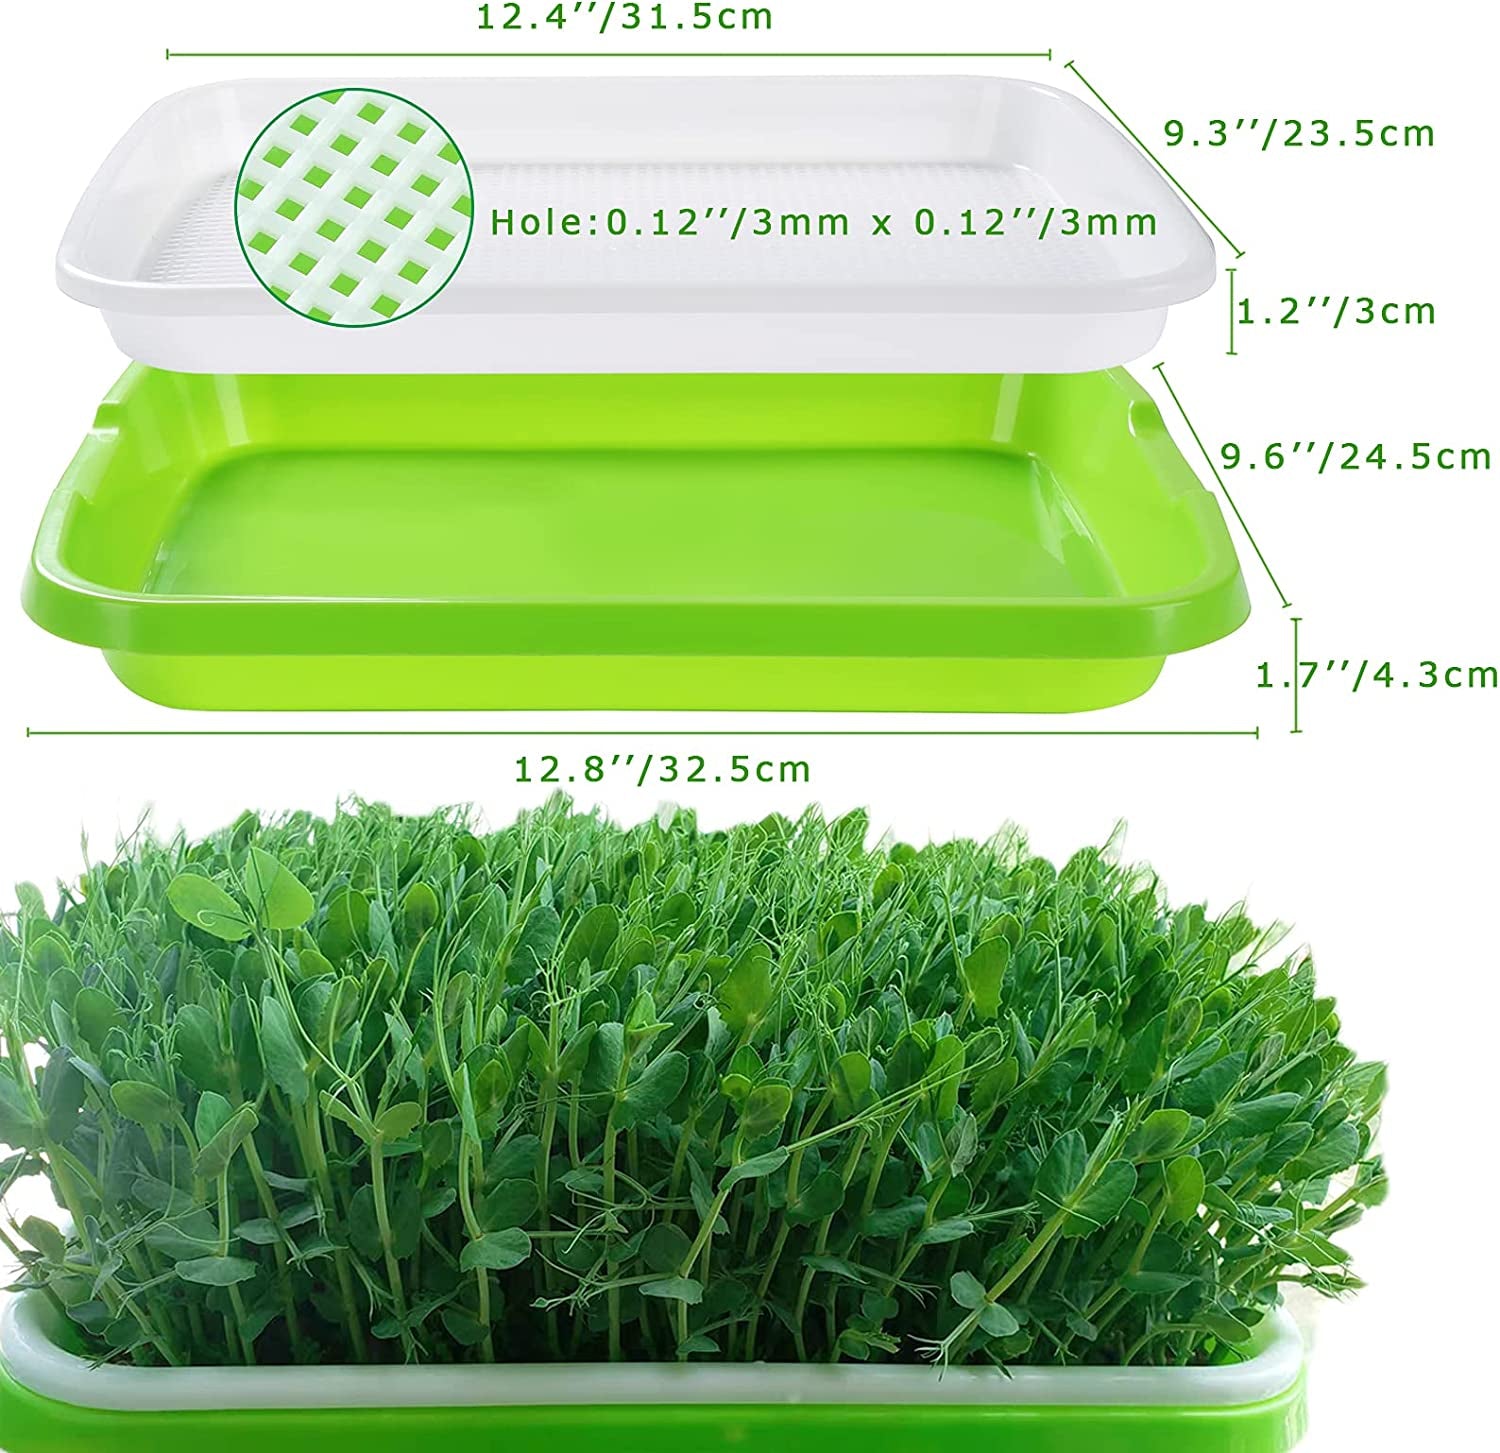 MAOPINER, MAOPINER Seed Sprouter Tray with Drain Holes | BPA Free Nursery Tray Seed Germination Tray Healthy Wheatgrass Seeds Grower & Storage Trays for Garden Home Office with Germinating Paper (5)